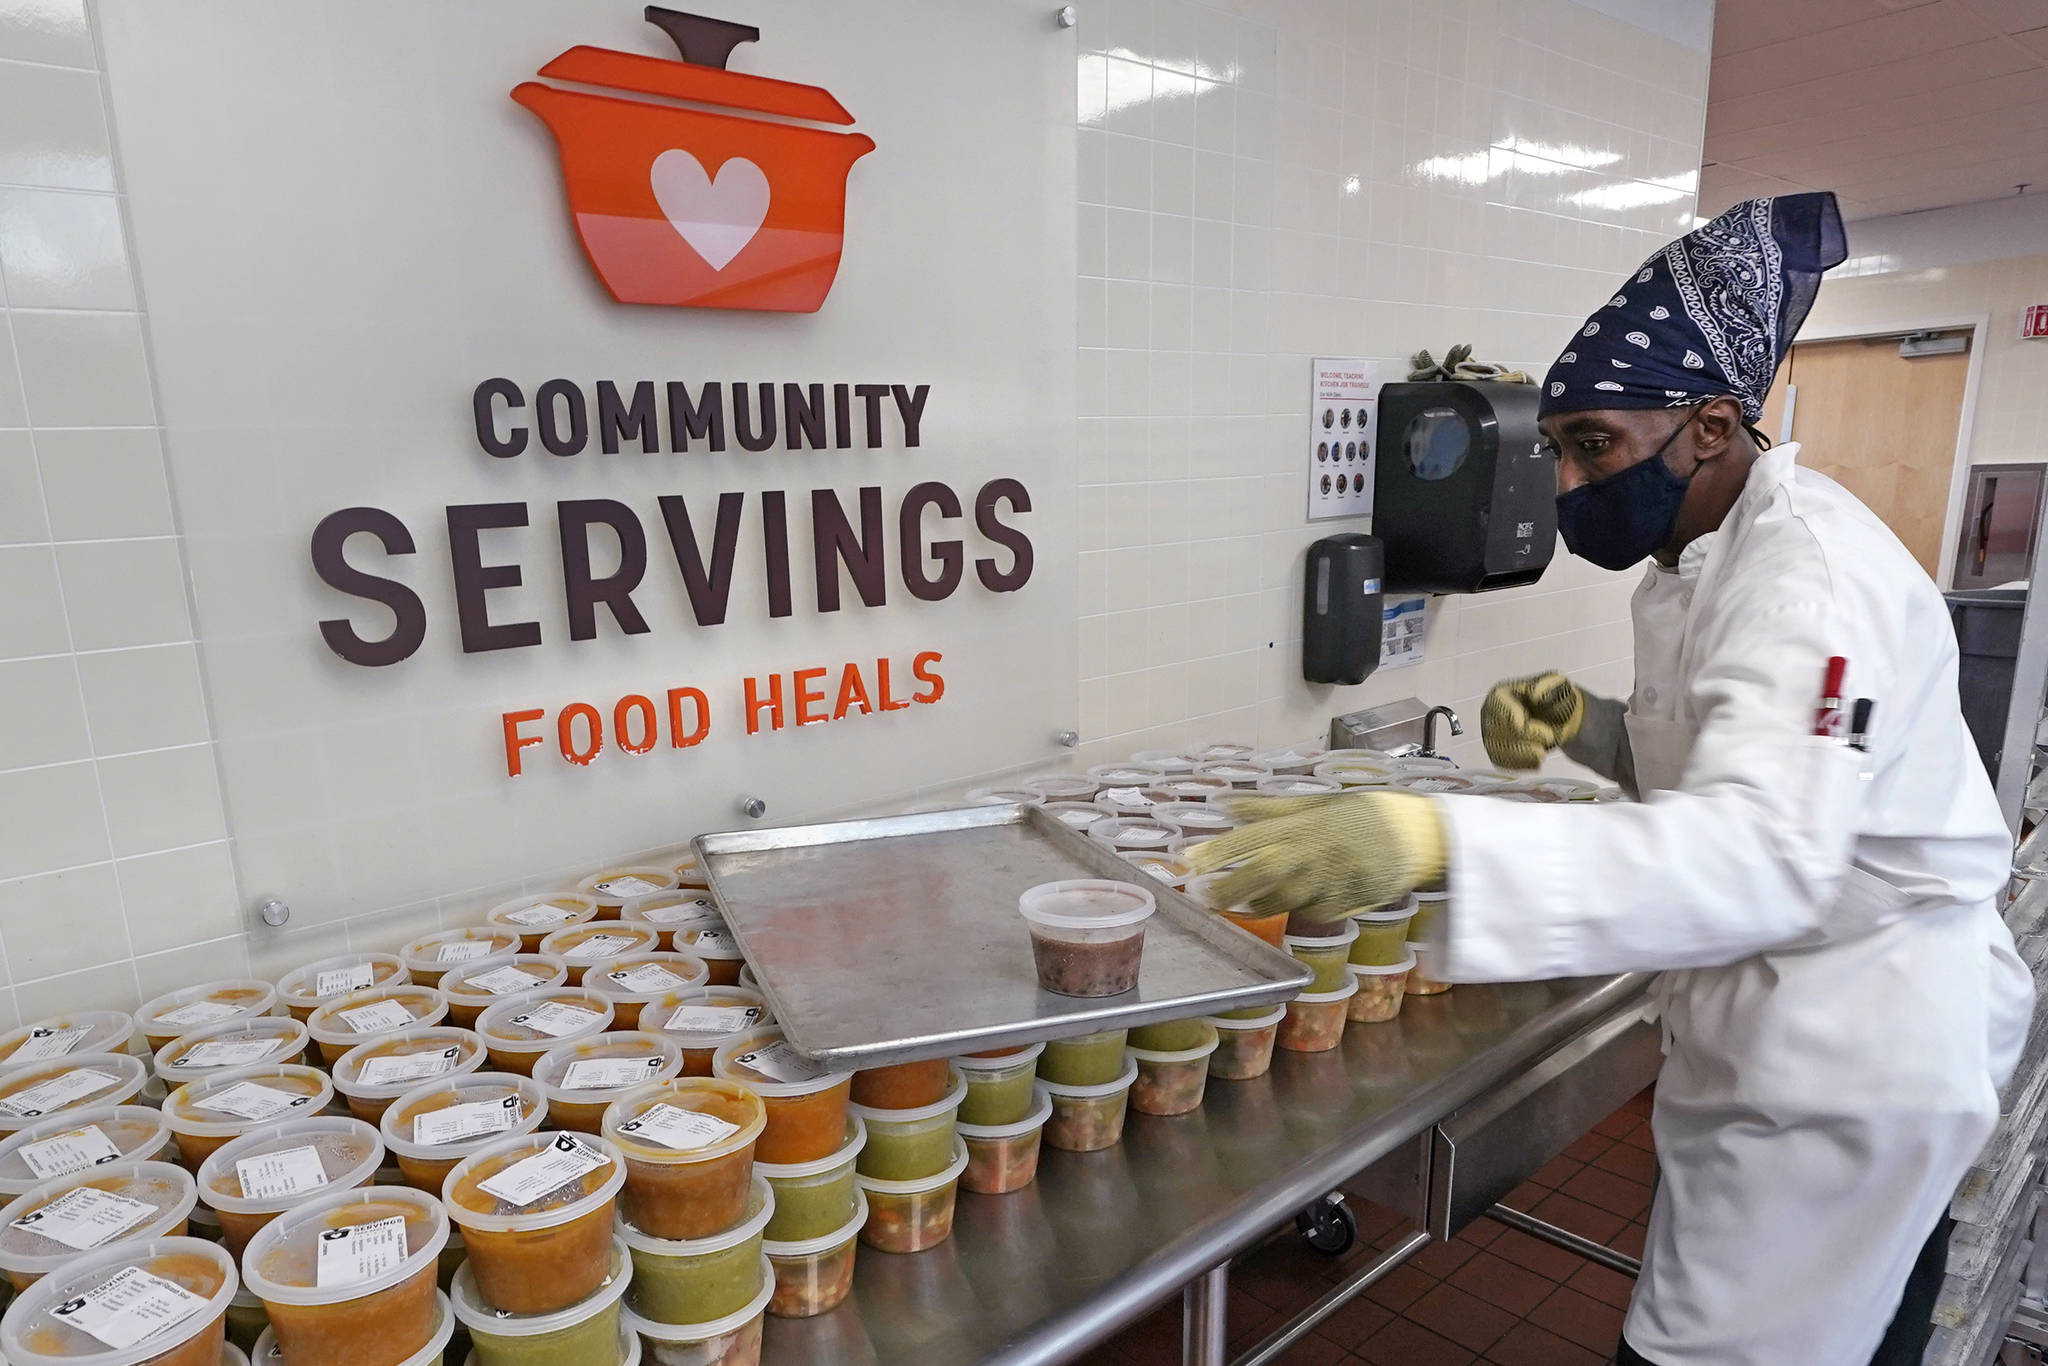 Chef Jermaine Wall stacks containers of soups at Community Servings, which prepares and delivers scratch-made, medically tailored meals to individuals & families living with critical & chronic illnesses, Tuesday, Jan. 12, 2021, in the Jamaica Plain neighborhood of Boston. Food is a growing focus for insurers as they look to improve the health of the people they cover and cut costs. Insurers first started covering Community Servings meals about five years ago, and CEO David Waters says they now cover close to 40%. (AP Photo / Charles Krupa)